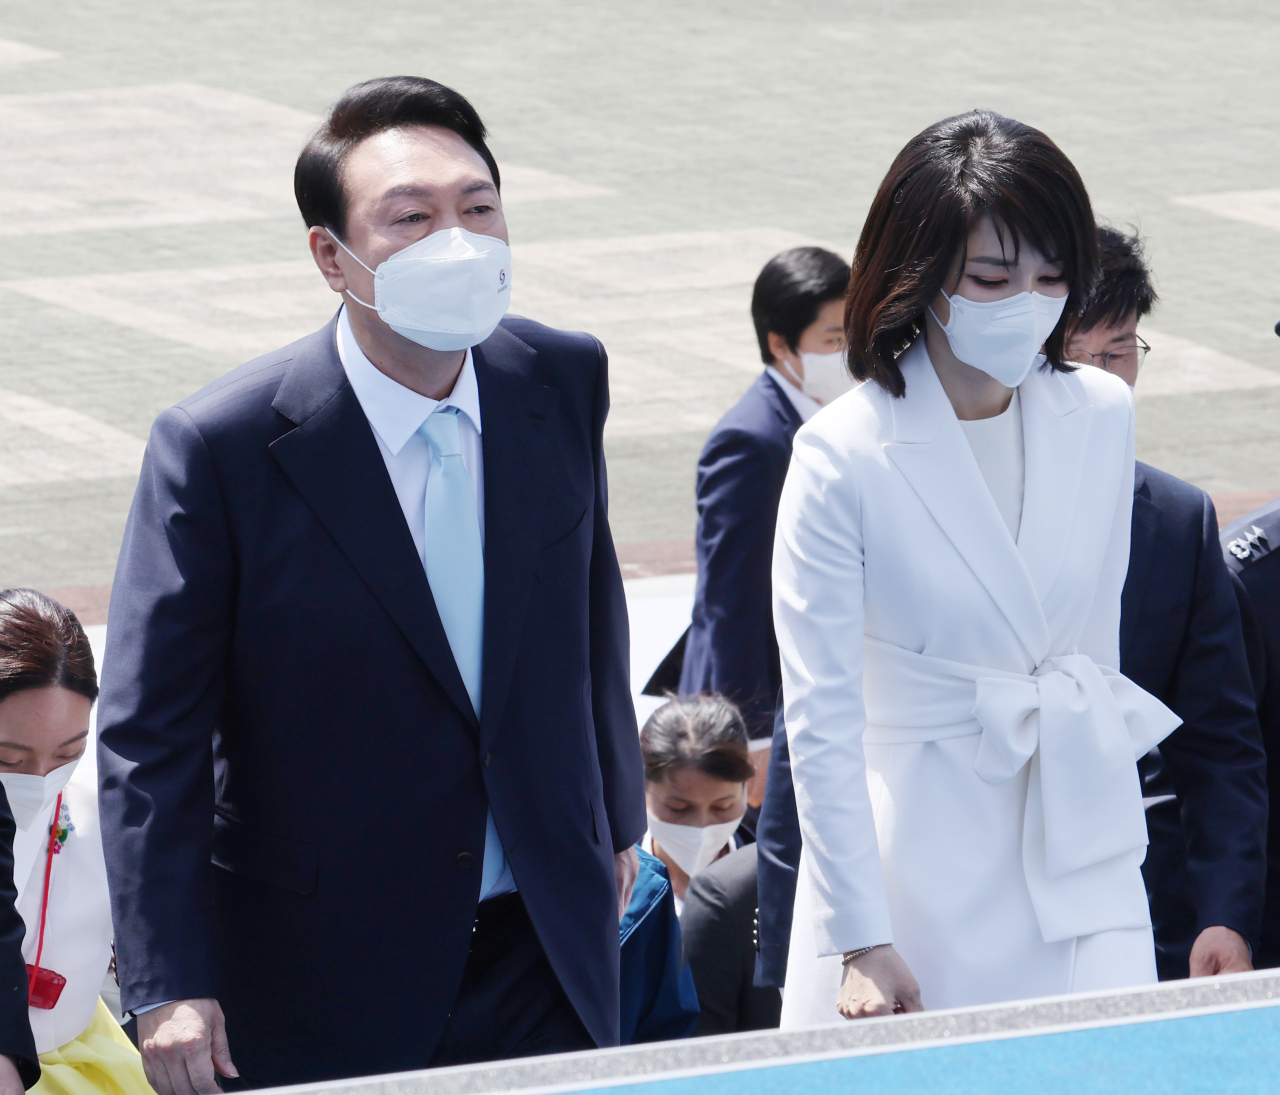 President Yoon Suk-yeol and first lady Kim Keon-hee arrive at the National Assembly in Yeouido, Seoul, Tuesday, for the presidential inauguration ceremony. (Yonhap)